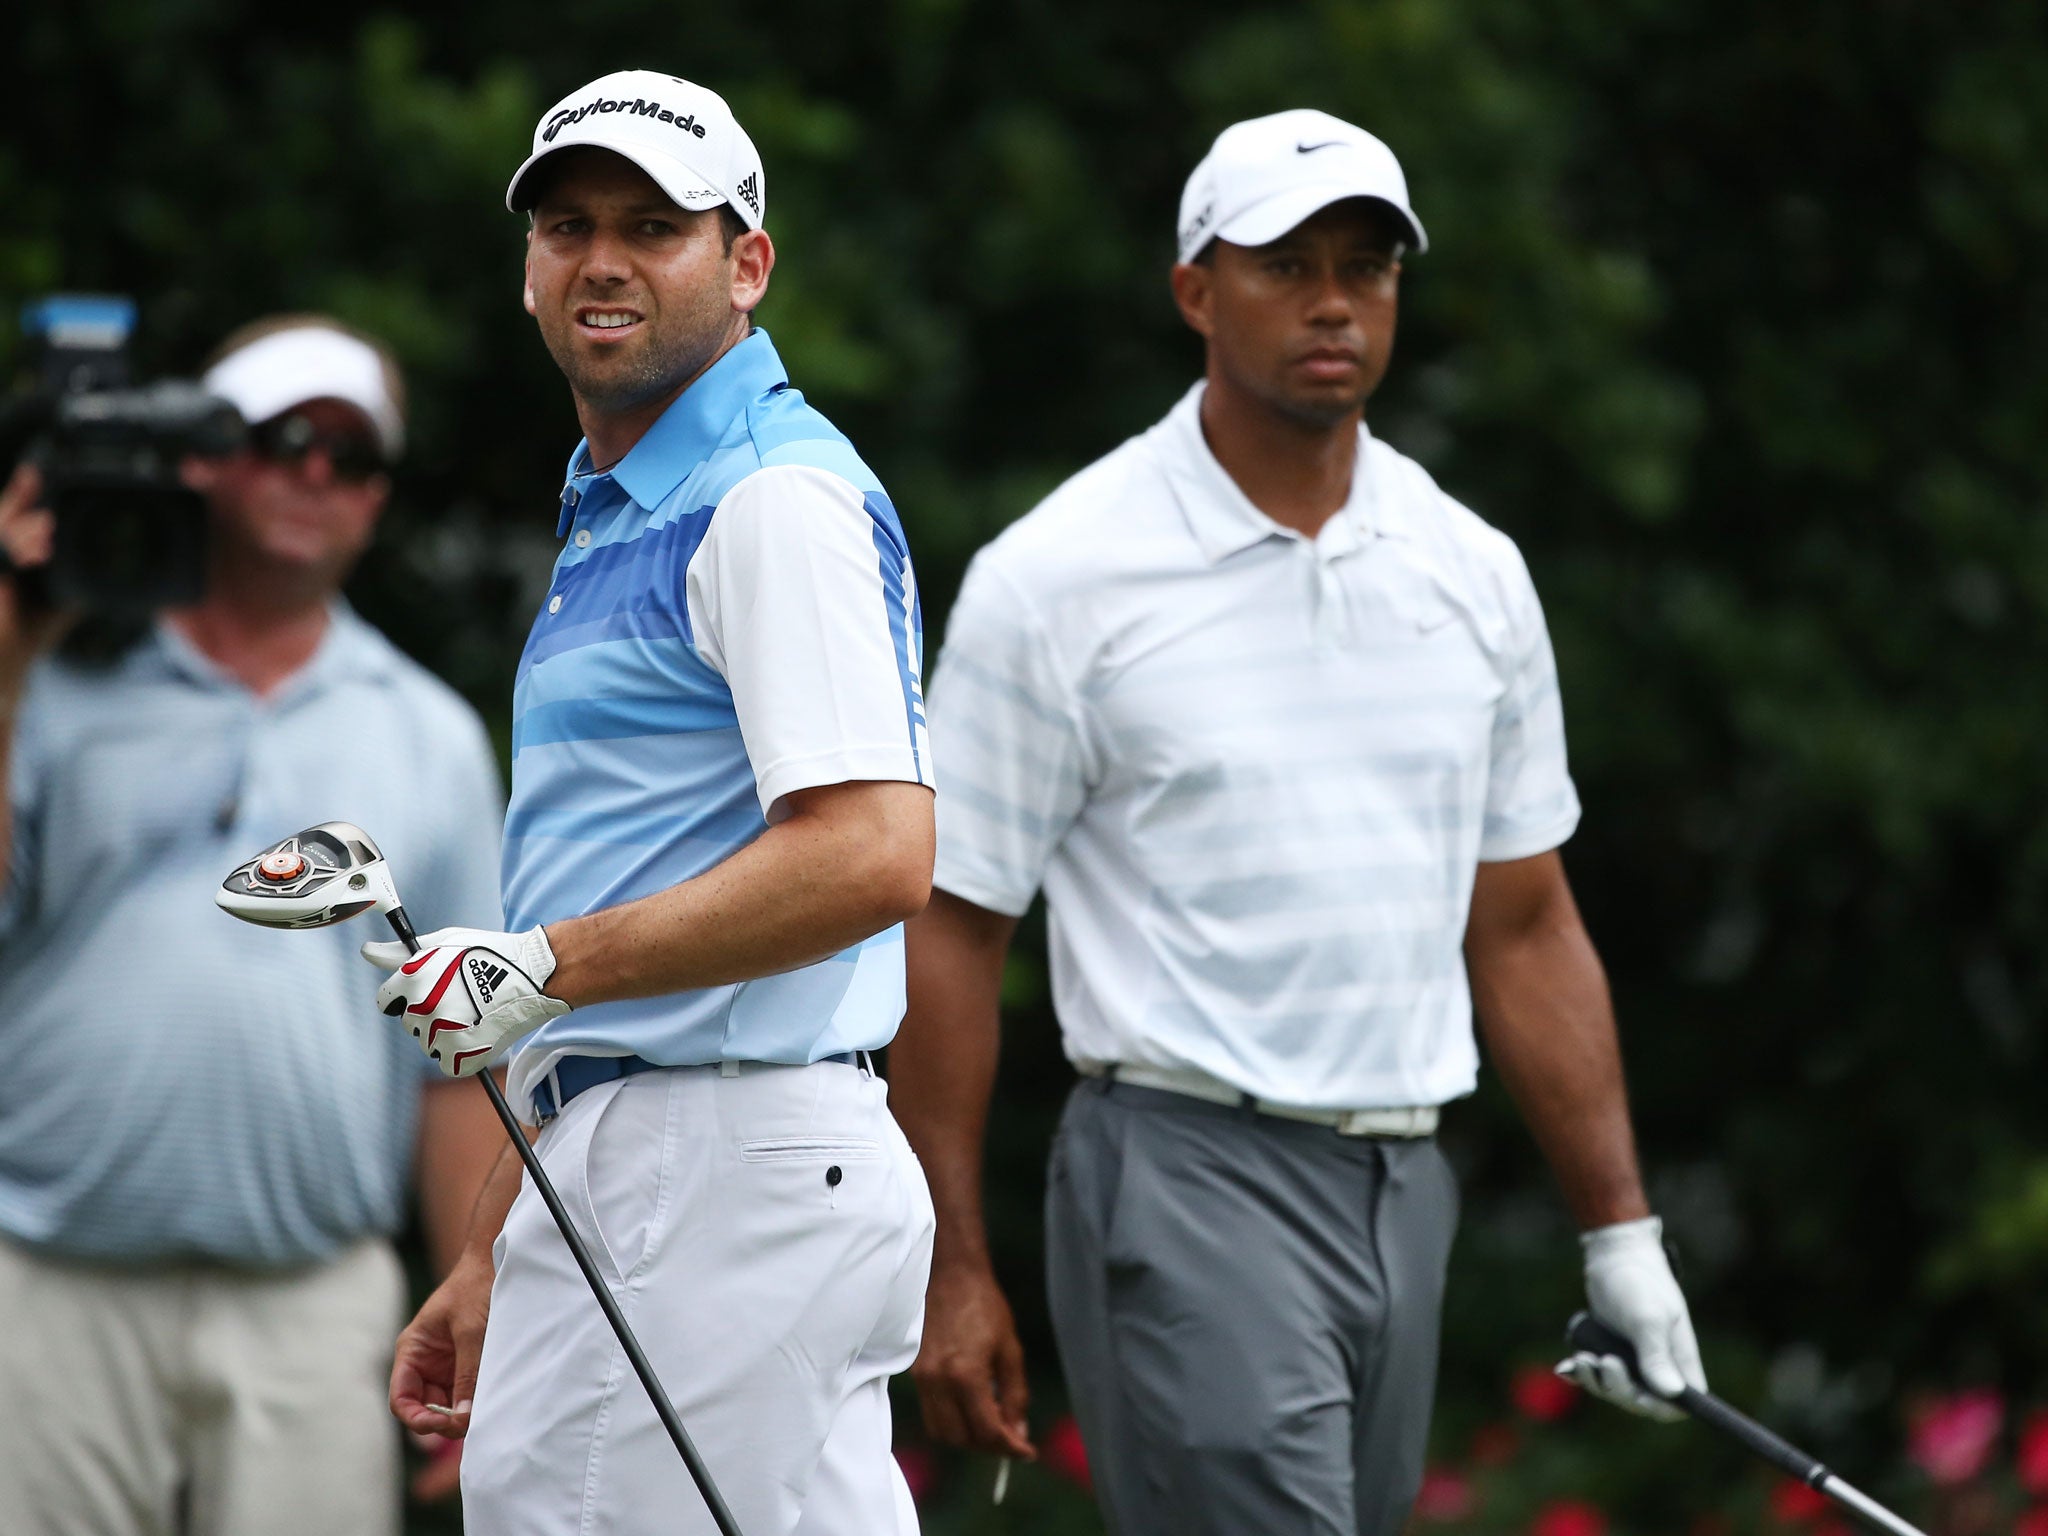 Sergio Garcia, left, and Tiger Woods, right, had another frosty round